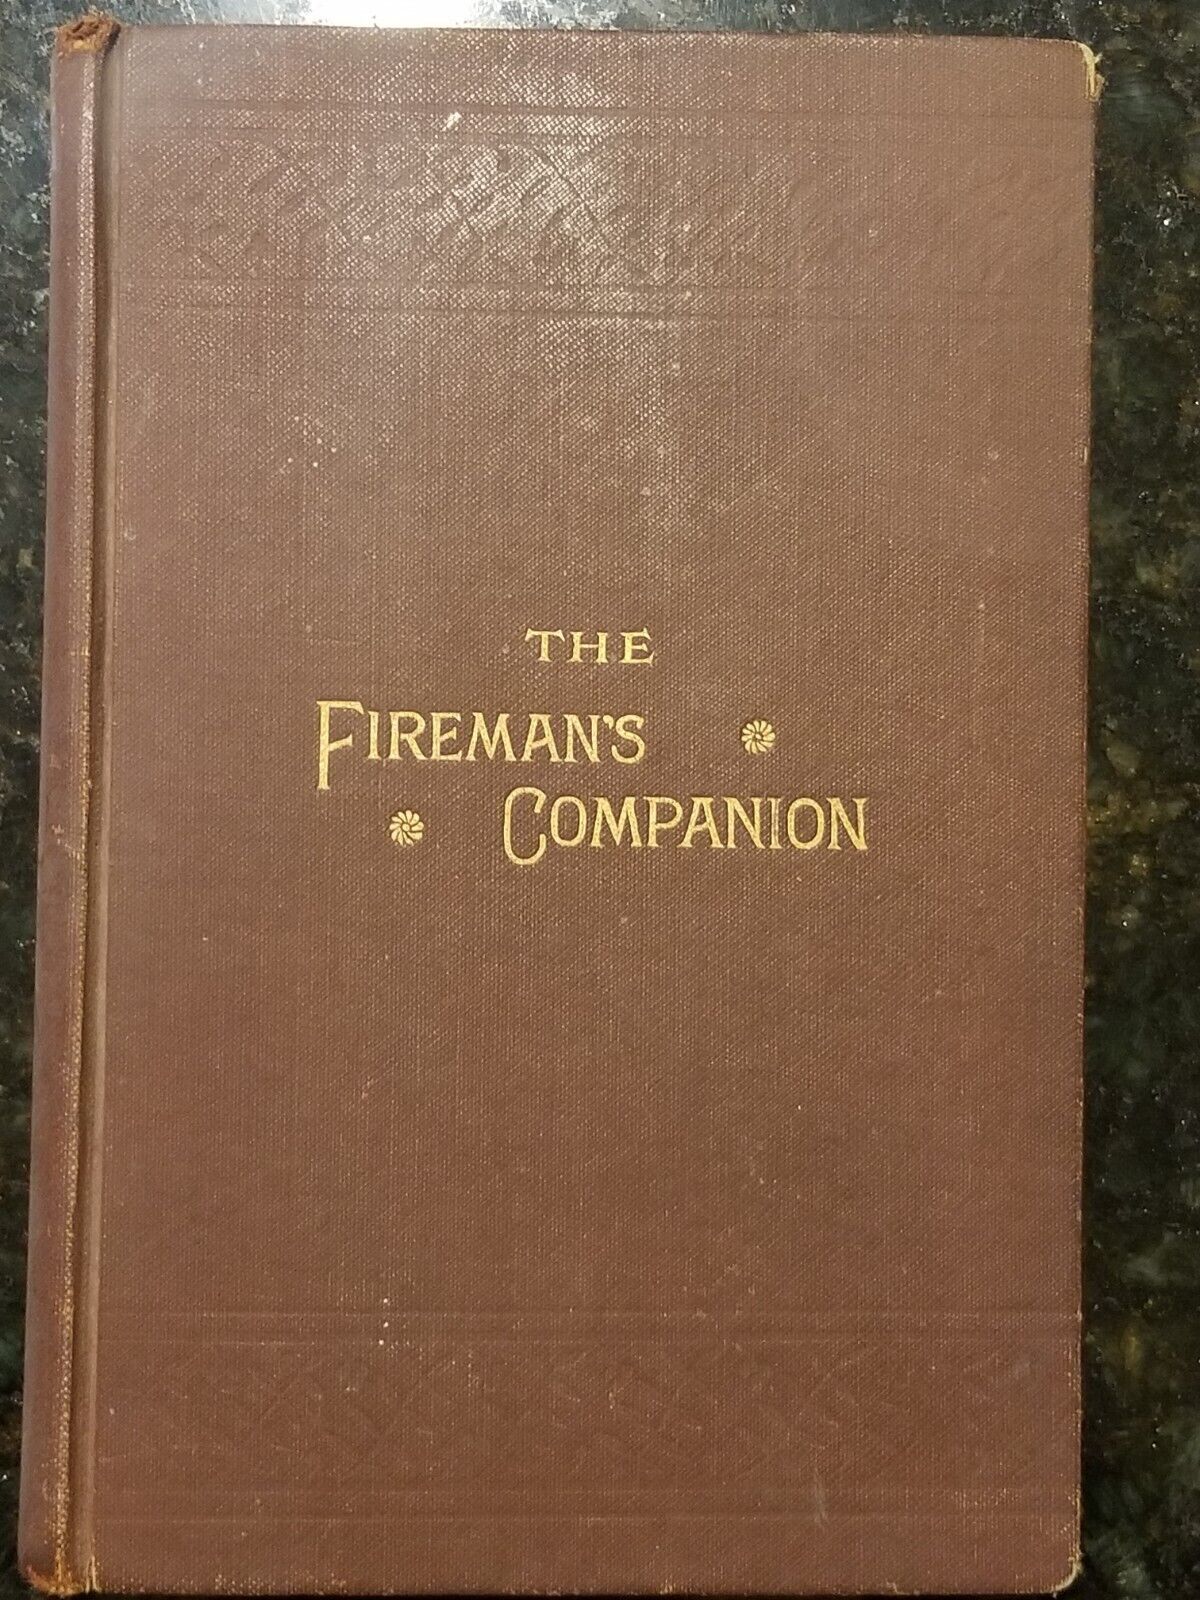 1882 The Fireman\'s Companion and Officers\' Hand Book by CAIRNS FIREMAN EQUIPMENT